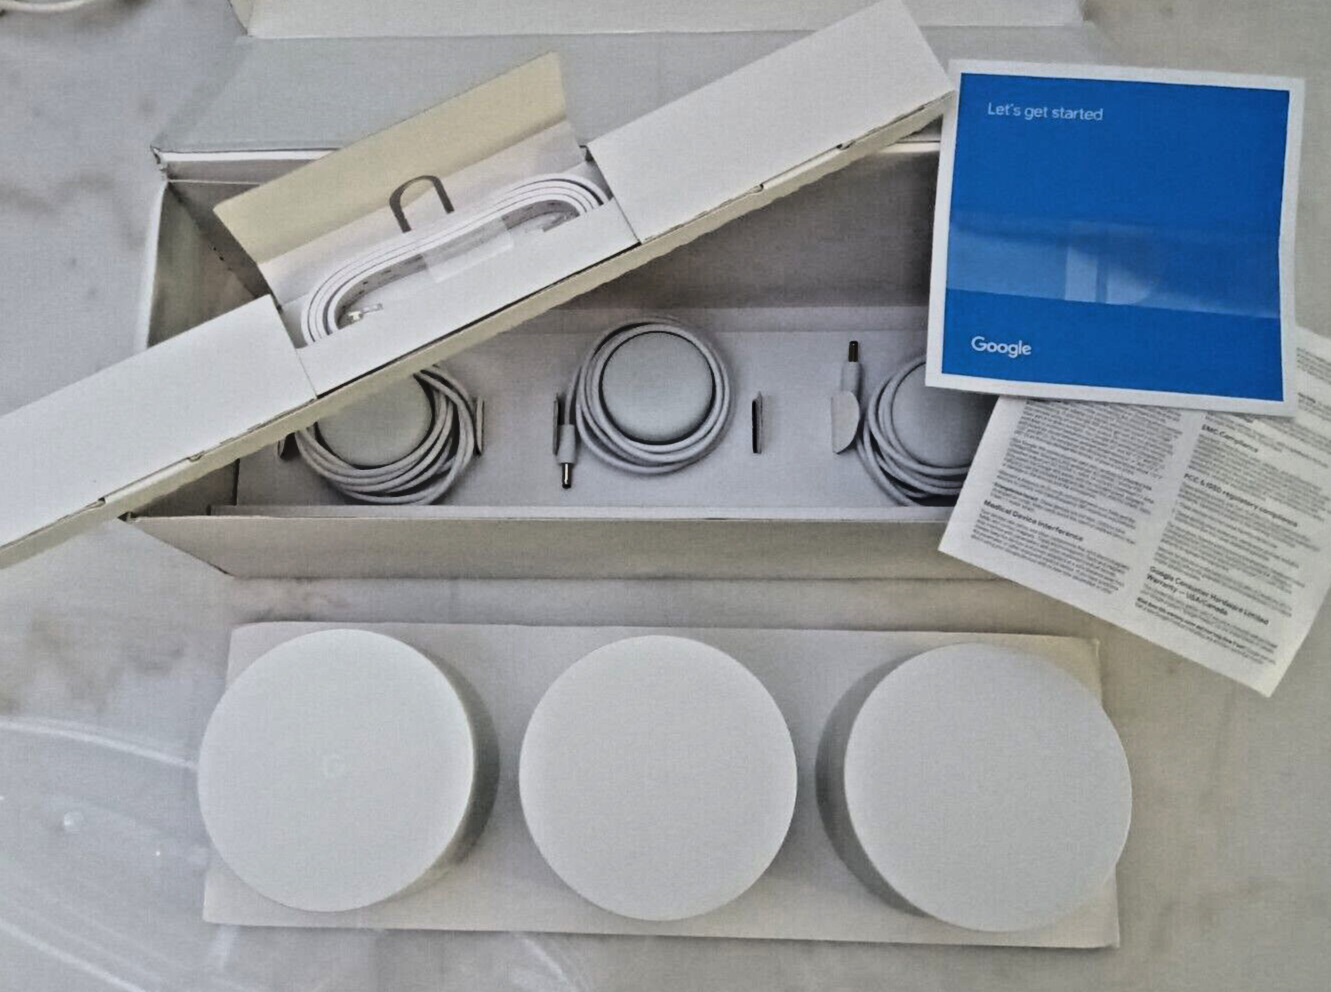 Google Wifi -AC1200 -Mesh WiFi System -Wifi Router - 4500 Sq Ft Coverage -3 pack